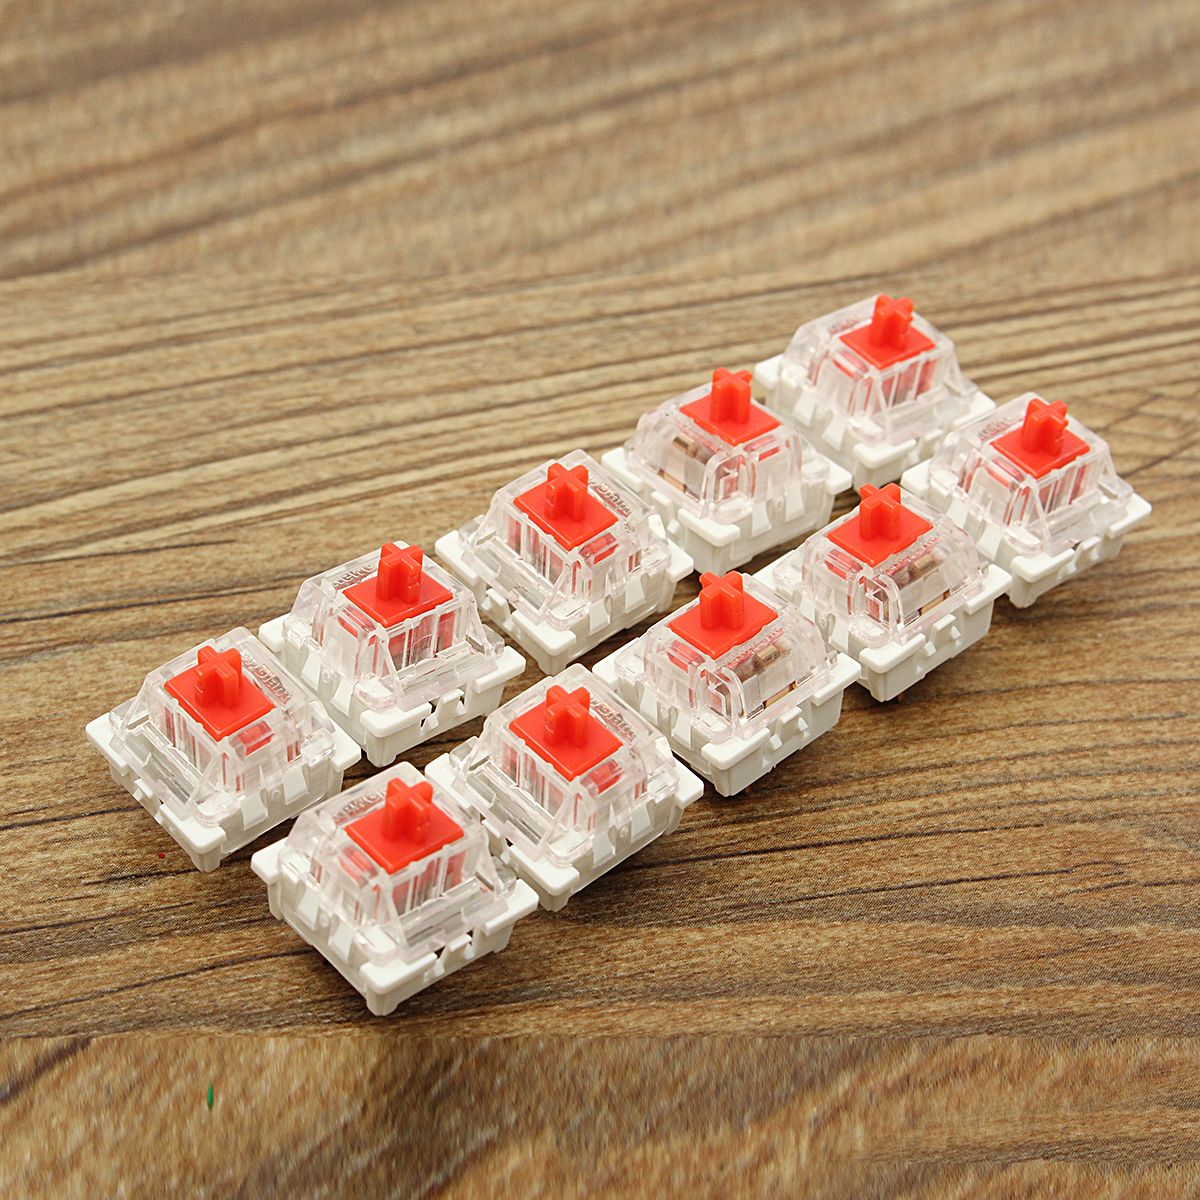 10-Pcs-RGB-Series-Red-Mechanical-Switch-for-Cherry-MX-Mechanical-Keyboard-Replacement-1114348